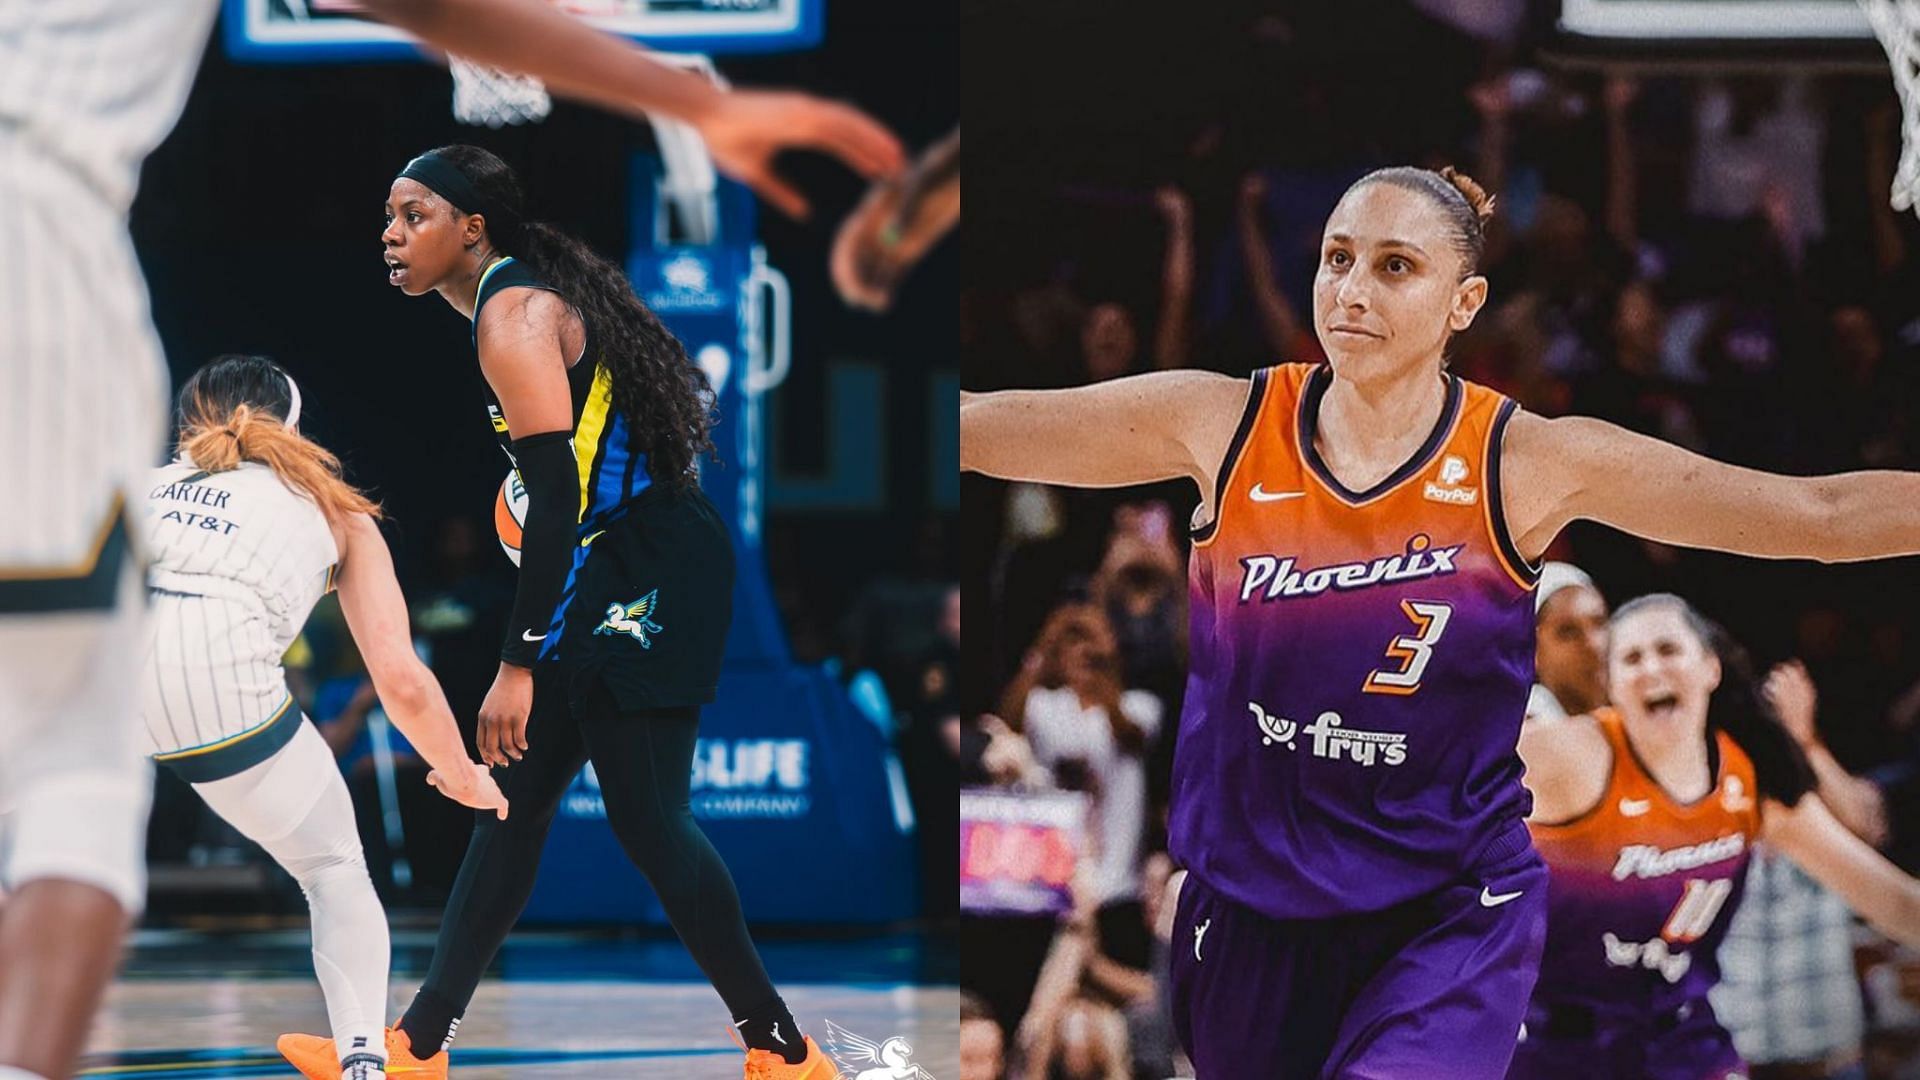 The Dallas Wings are set to face the red-hot Phoenix Mercury at Footprint Center on Saturday,